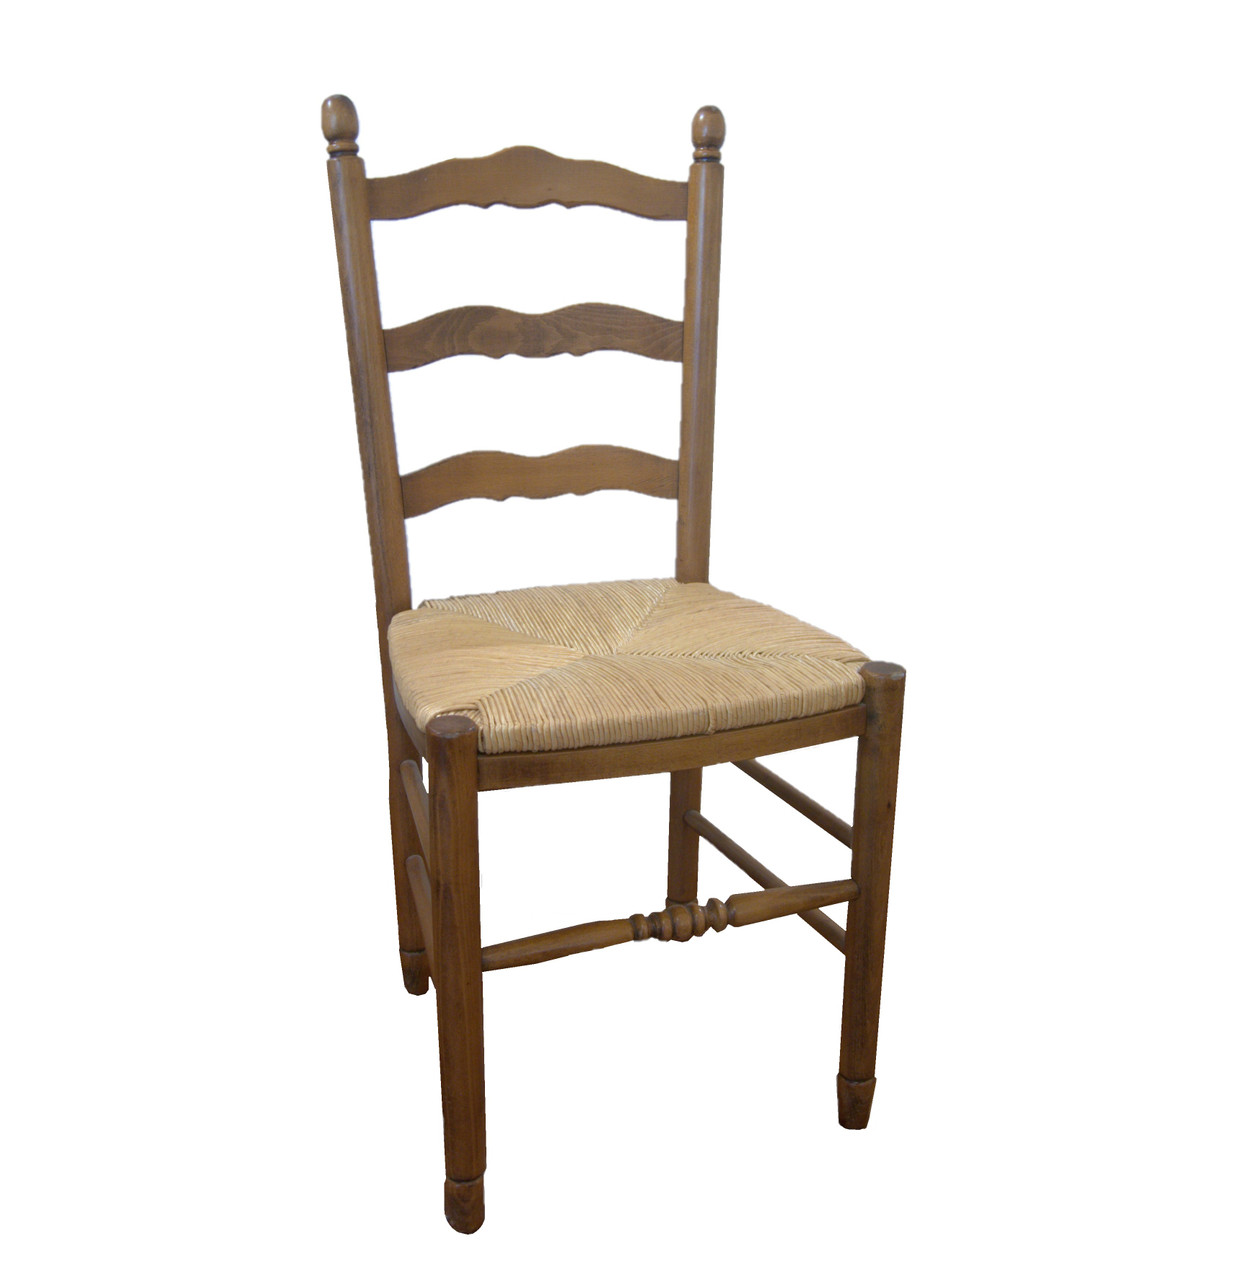 6 Vintage Italian Ladder Back Woven Rush Seat Dining Chairs In Store Now